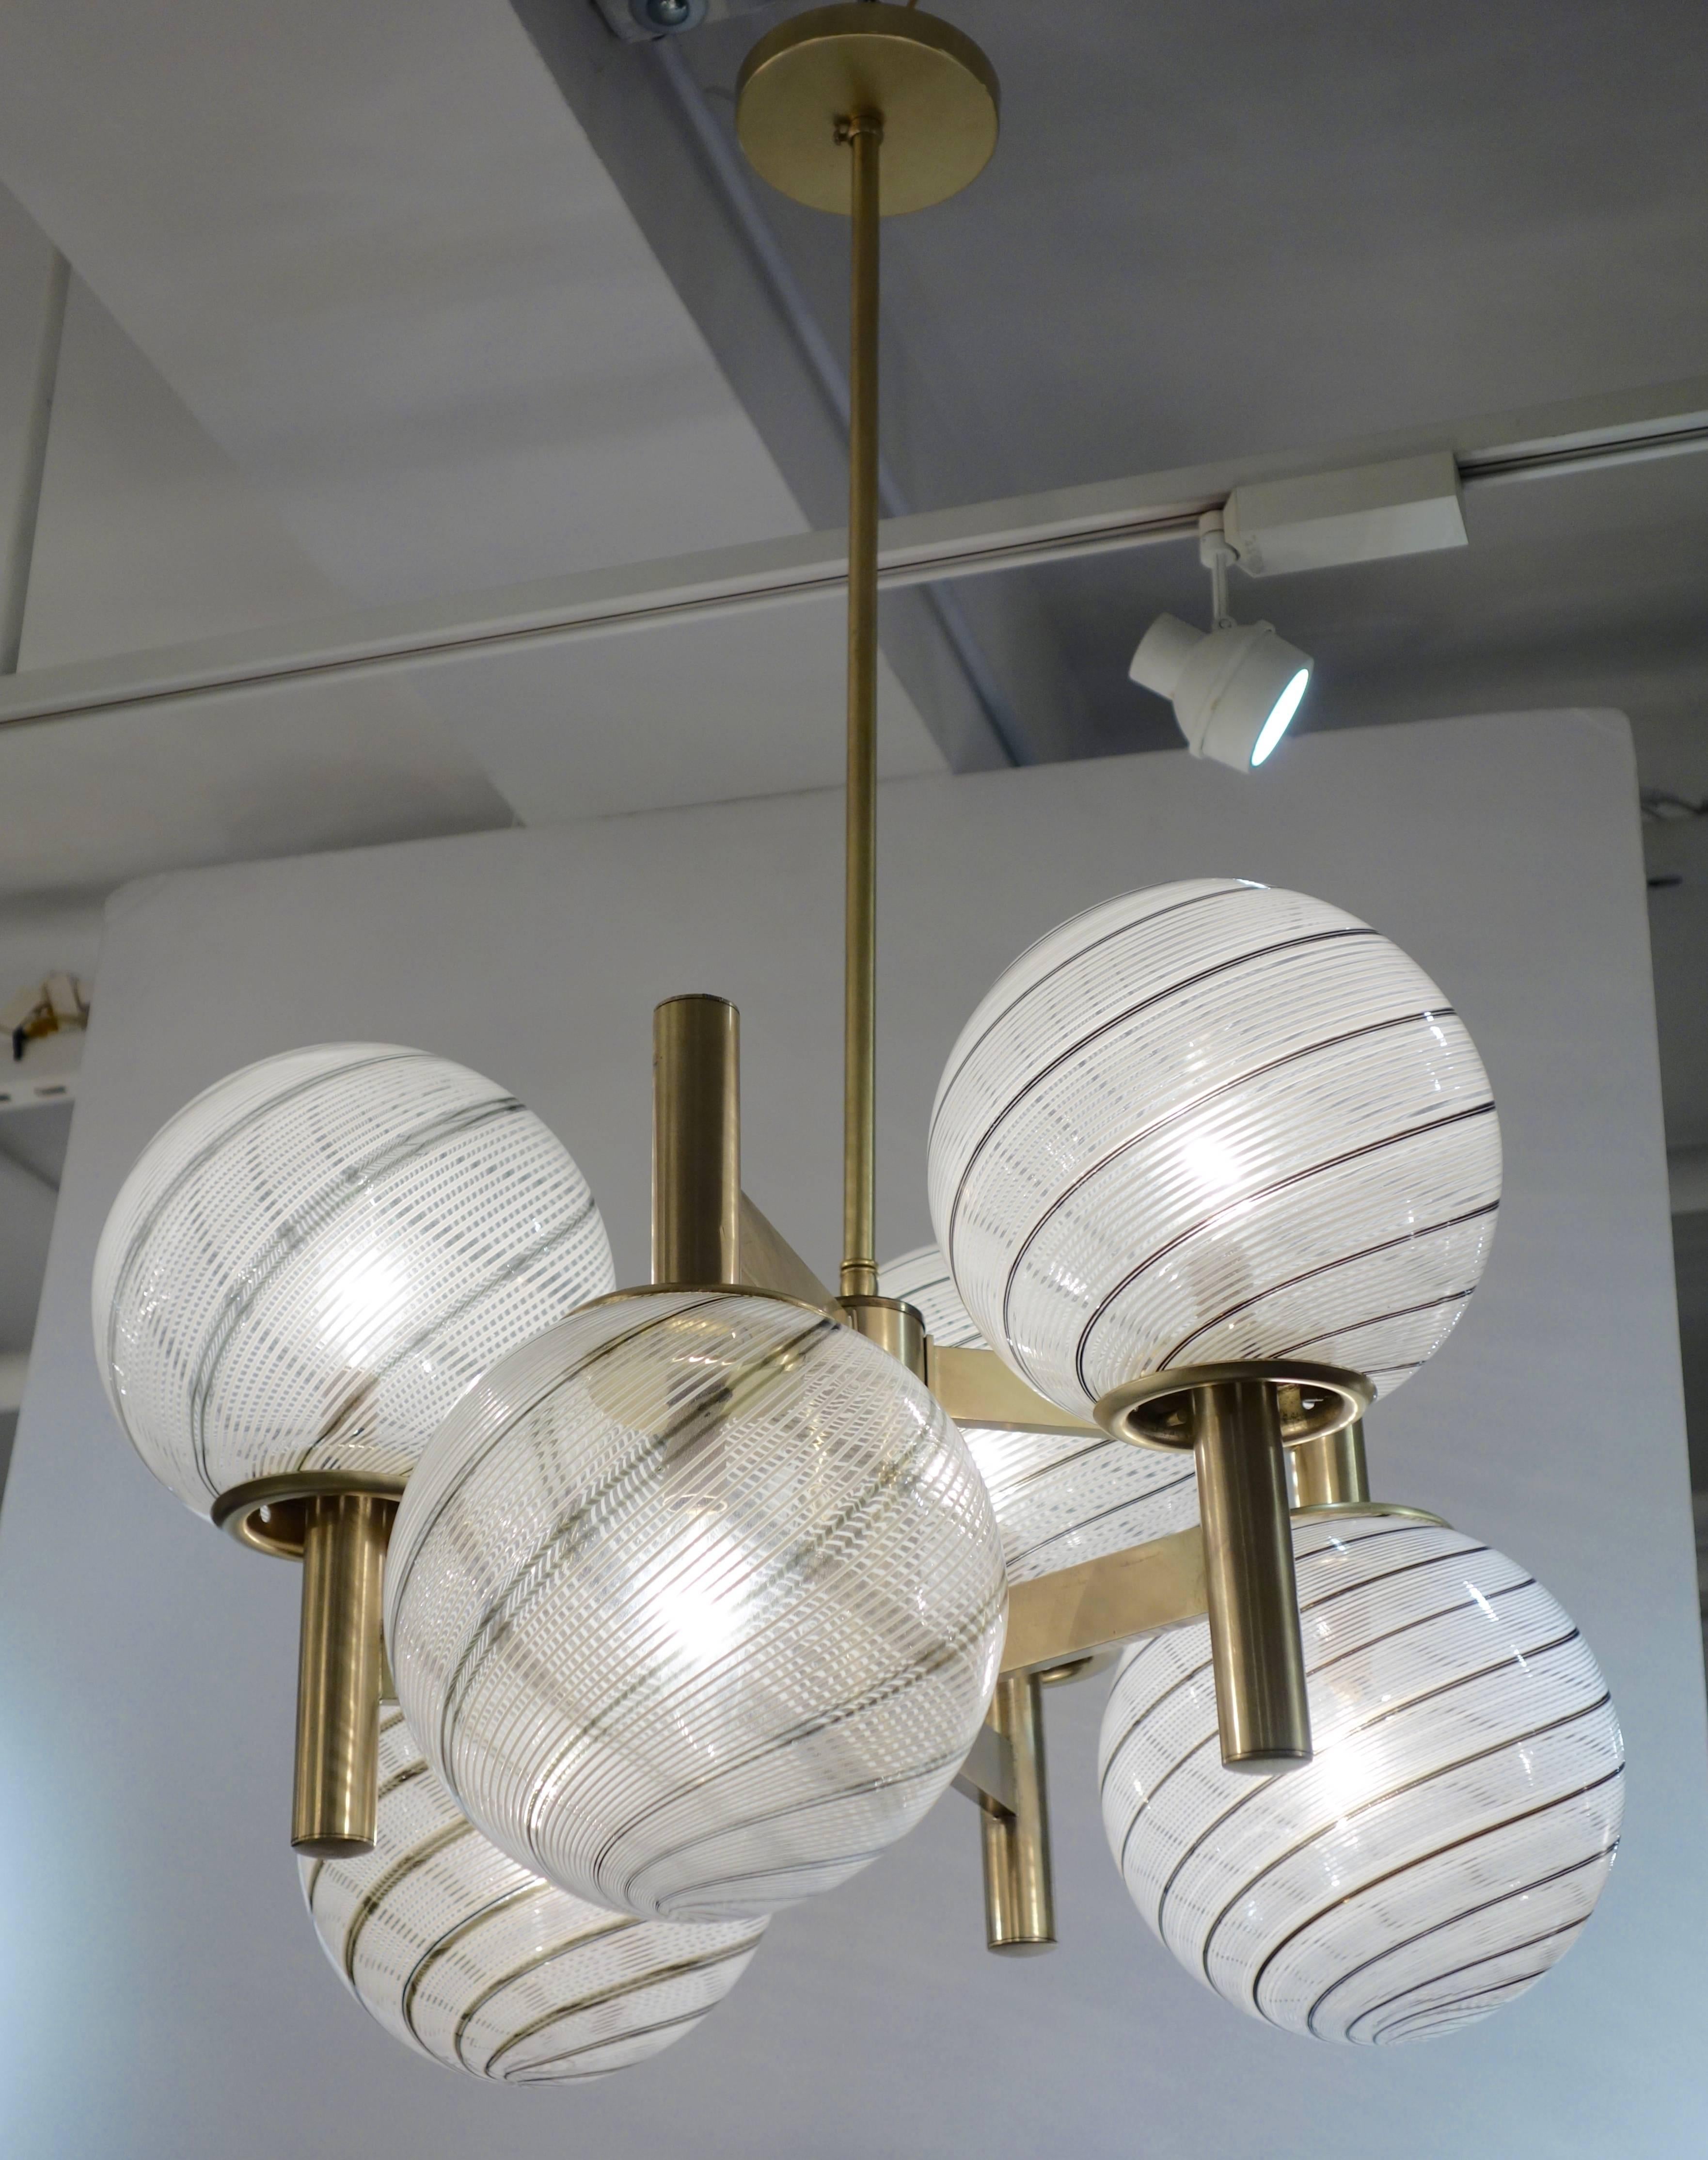 An Italian Mid-Century sculptural chandelier featuring six handblown Murano glass globes each a variation of clear with white and bronze to gray stripes with 3 downturned arms and 3 upturned, the frame re-plated in satin brass with 6 newly wired